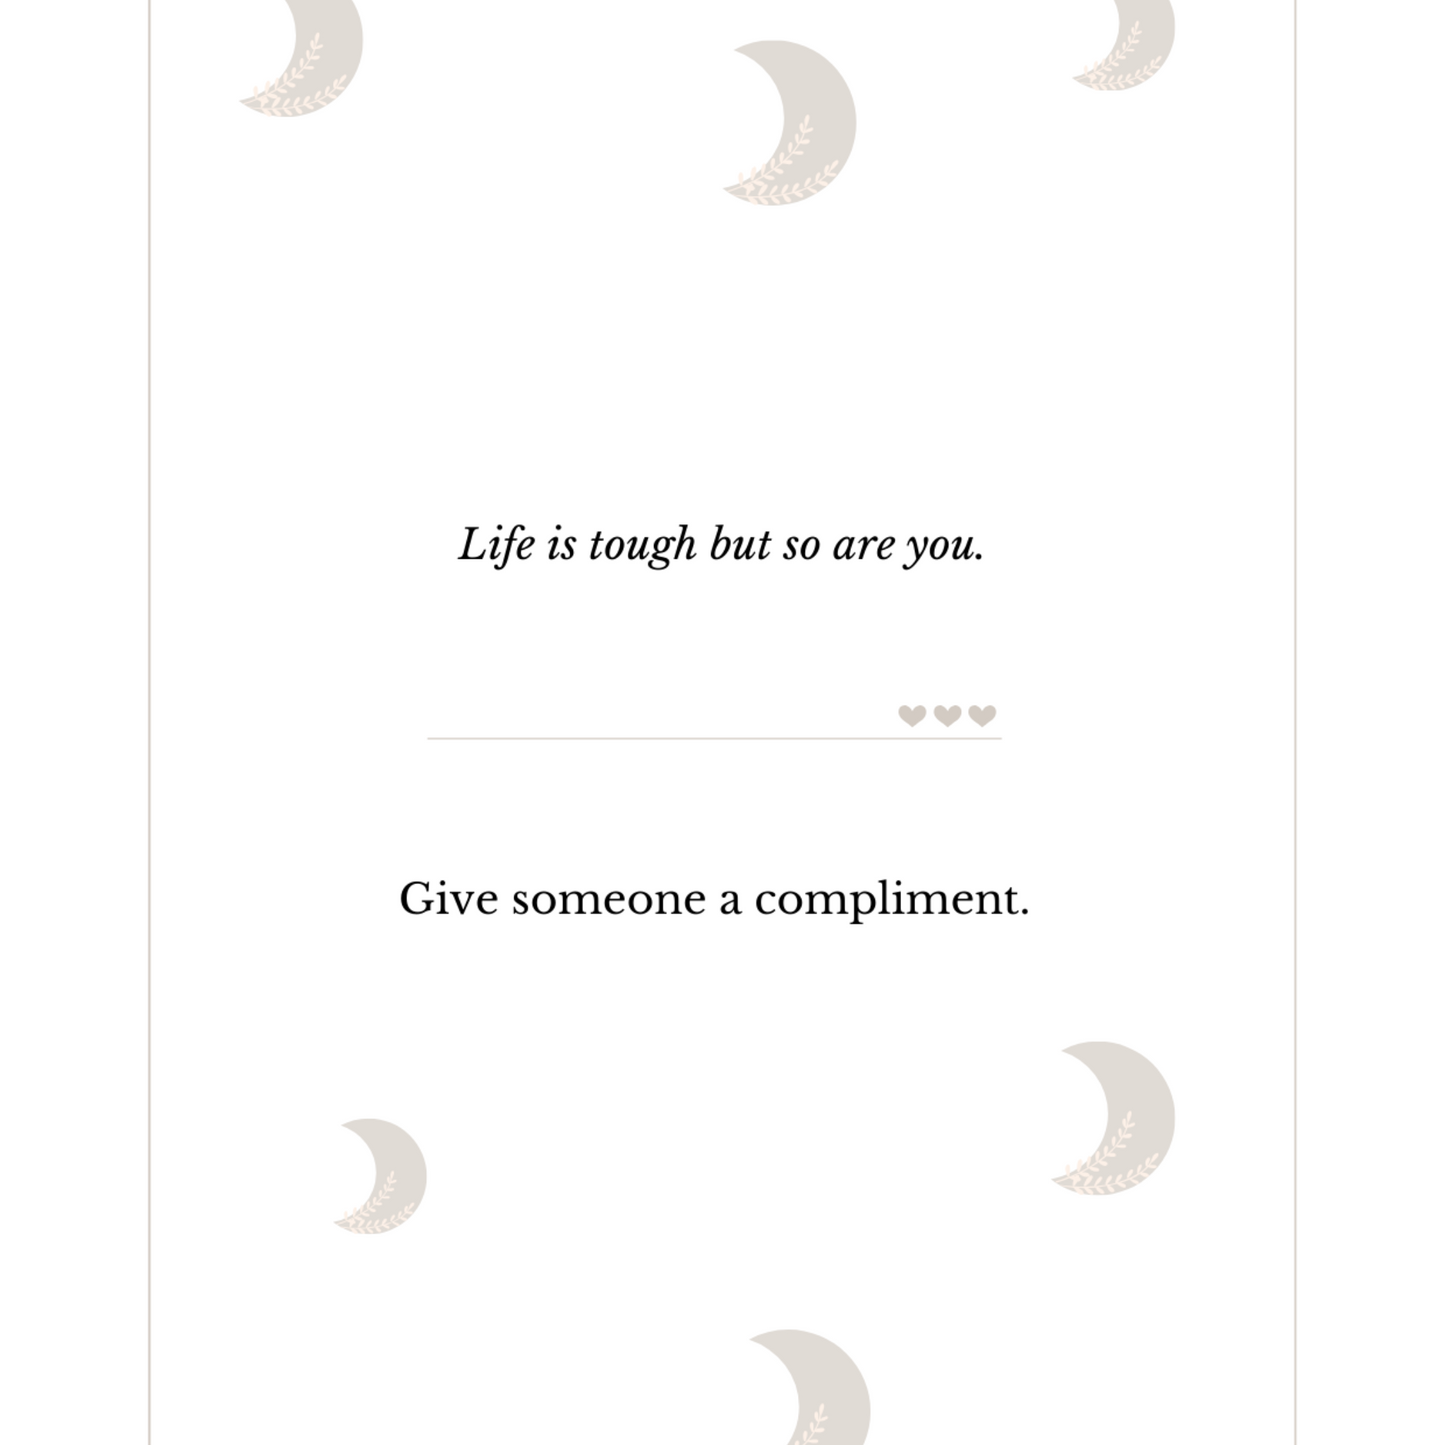 DIGITAL 30 MINIMALIST CARDS, INSPIRATIONAL QUOTES + ACTIVITIES TO DO, ENGLISH VERSION